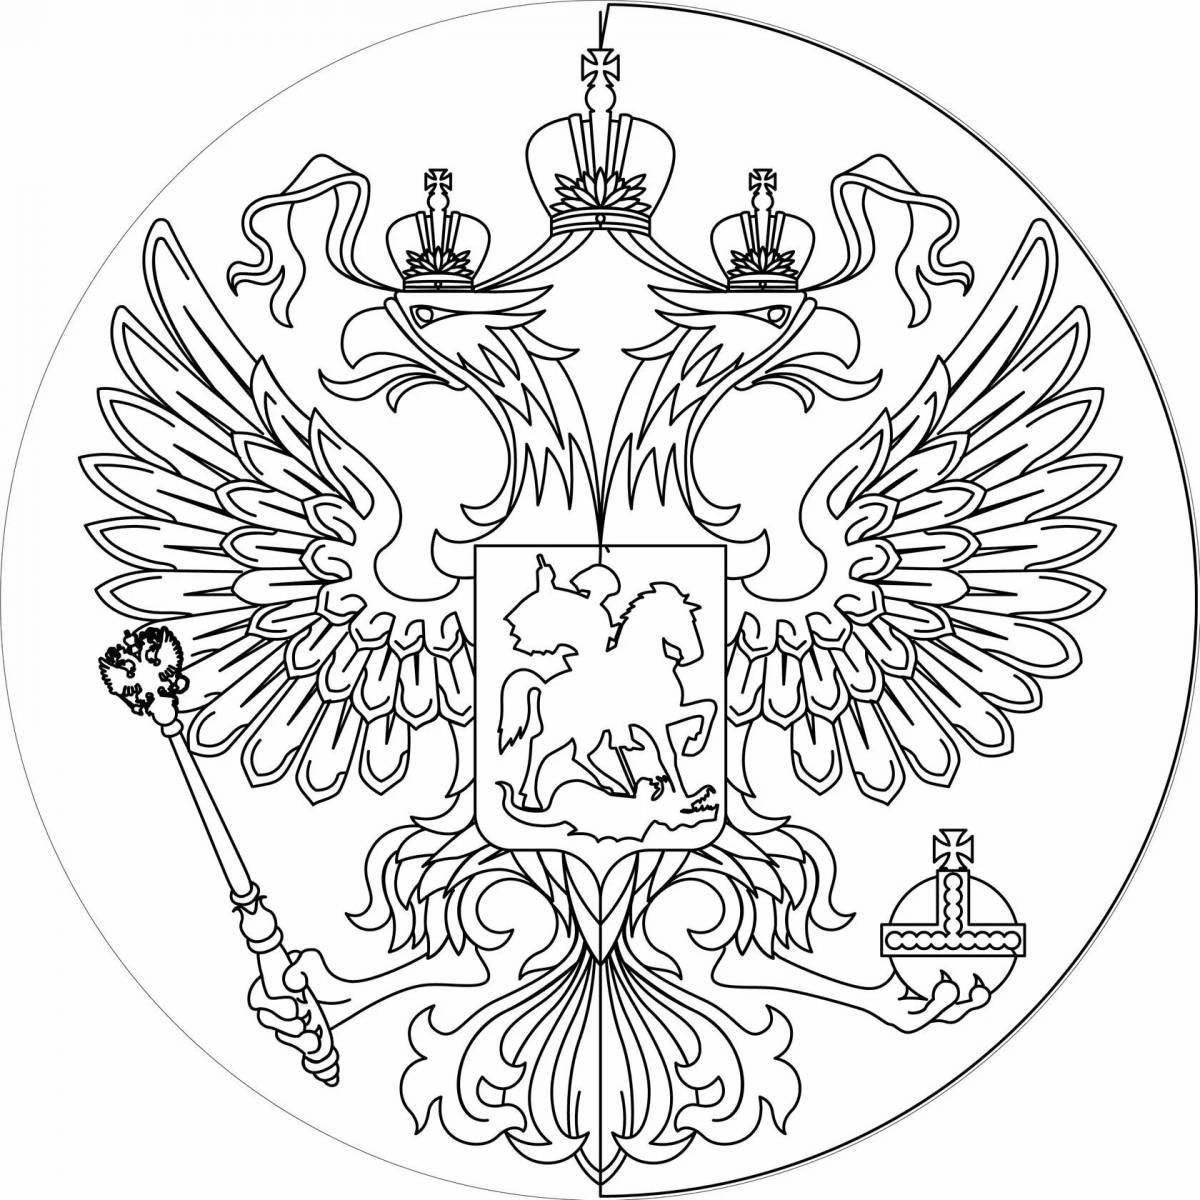 Terrific coat of arms of the russian federation for students